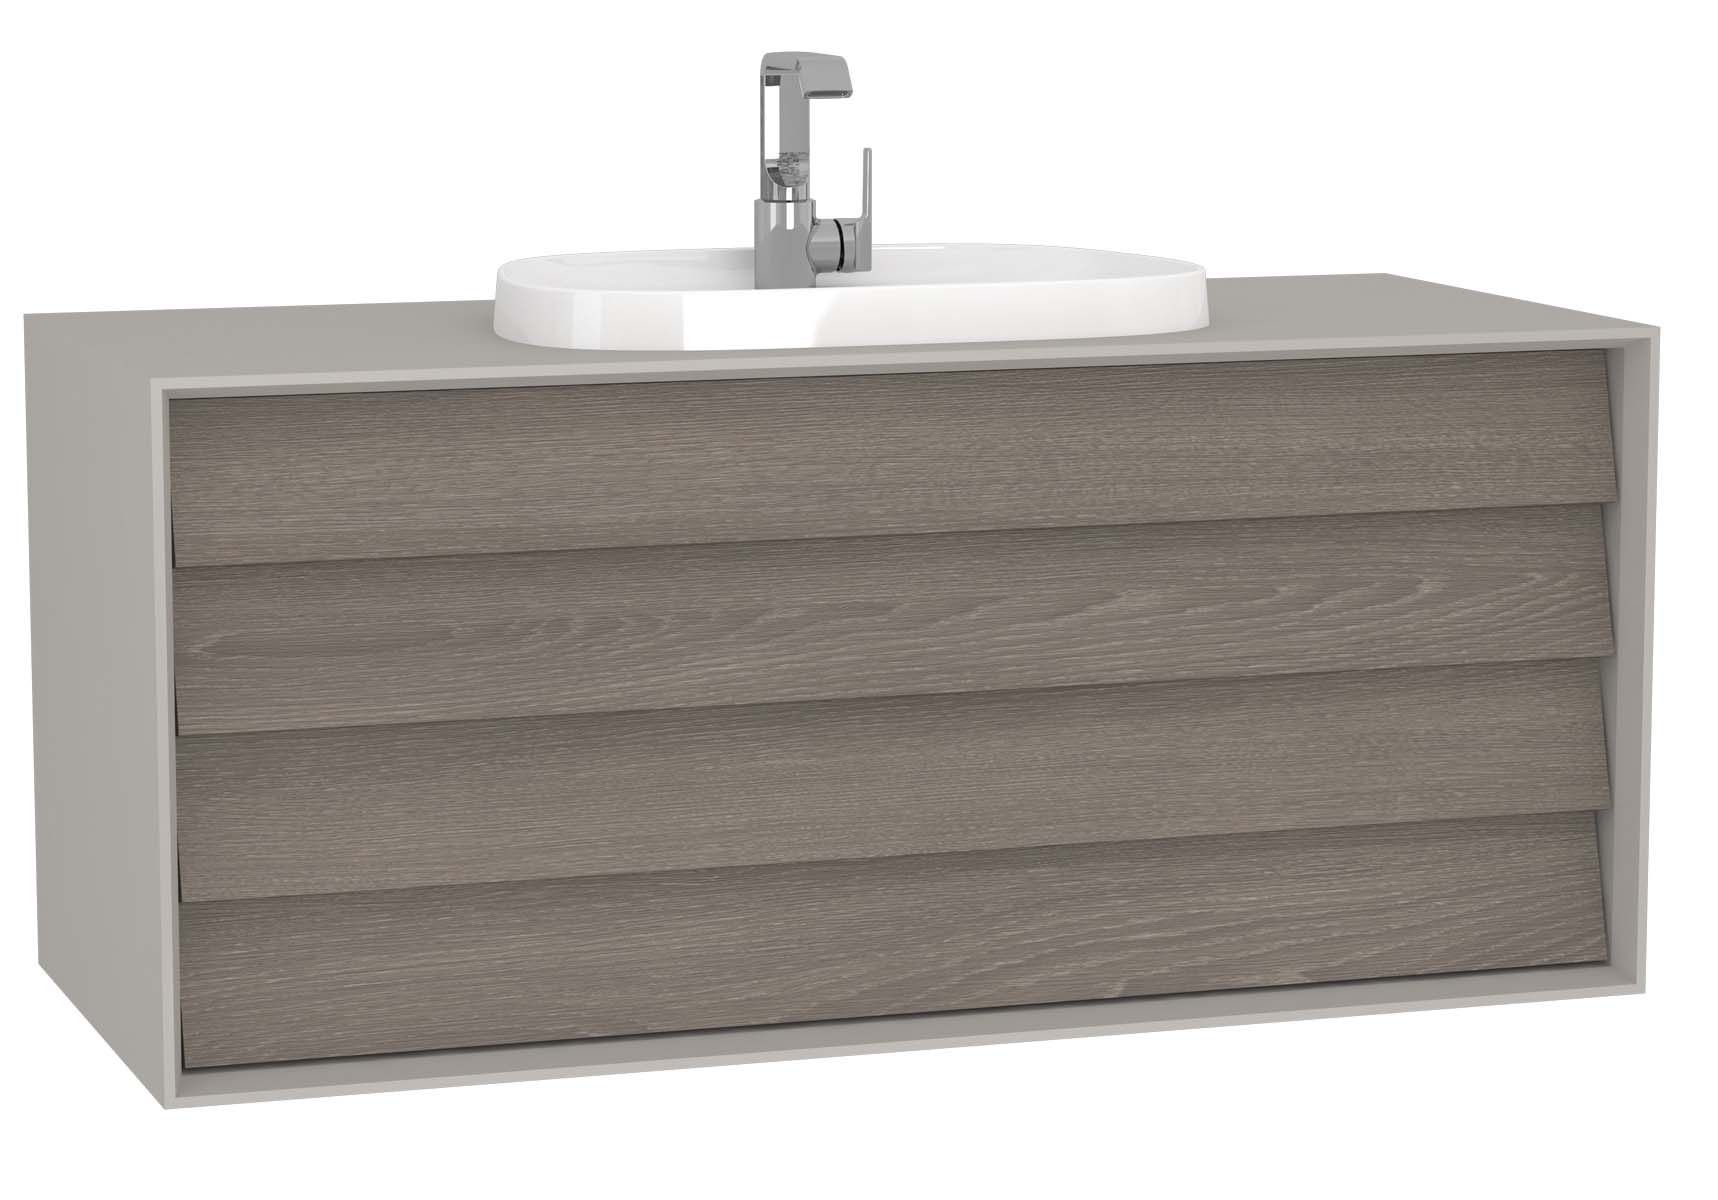 Frame Washbasin Unit, 120 cm, with 2 drawers, with countertop TV-shape washbasin, with faucet hole, Matte Taupe